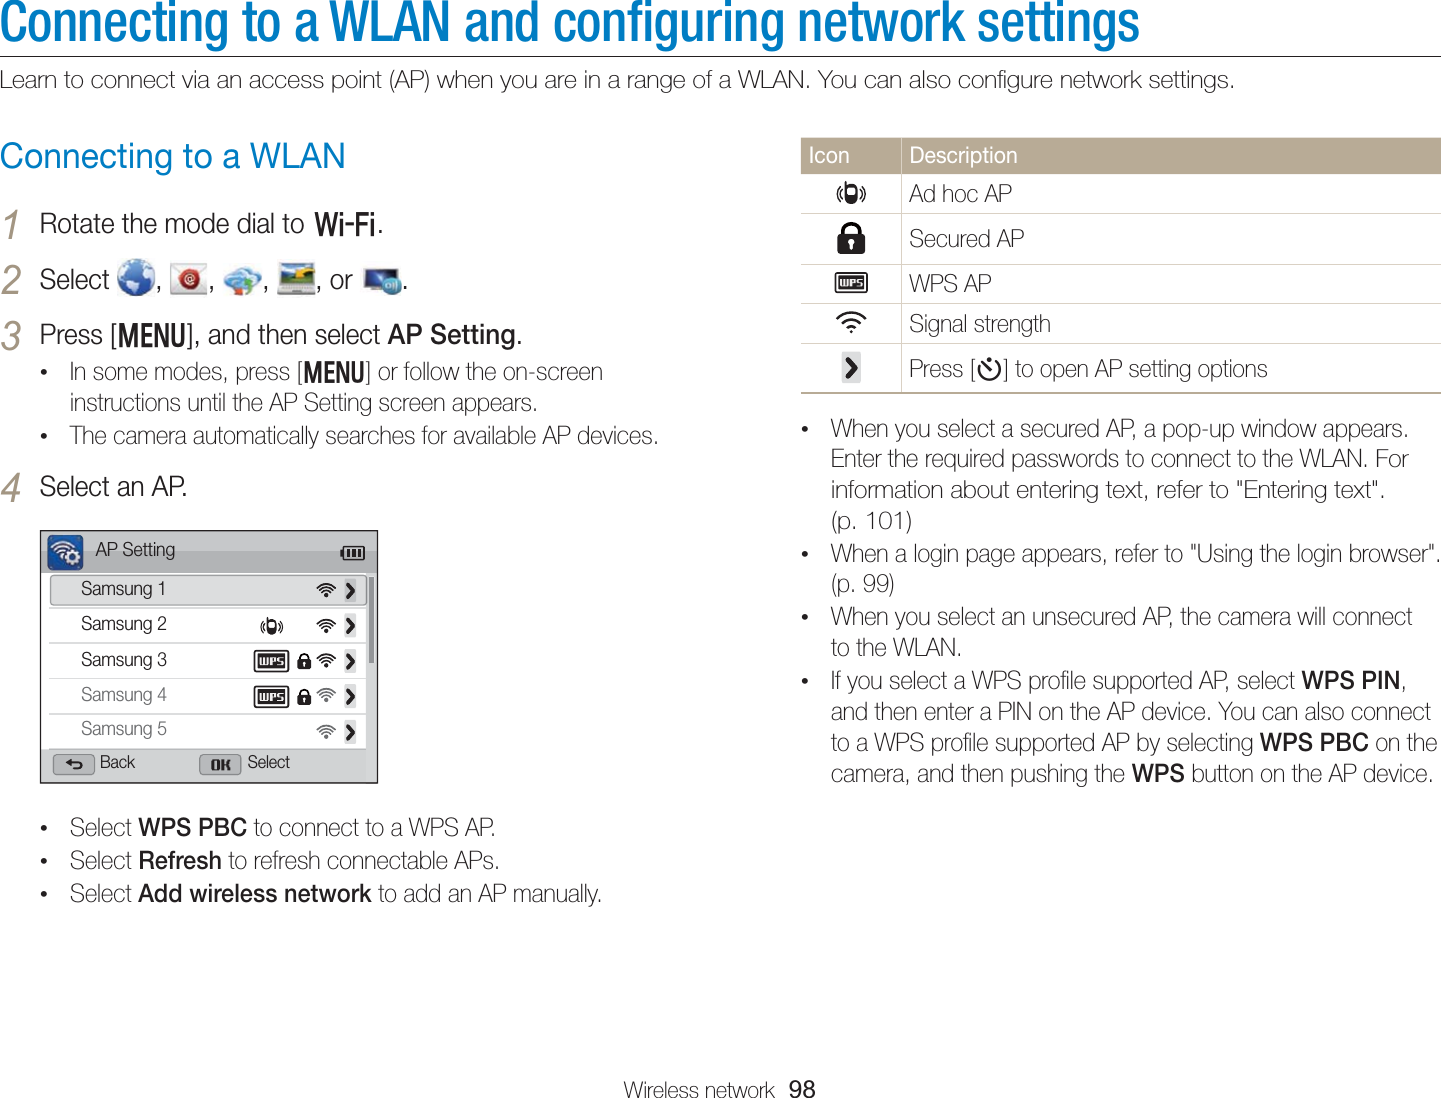 Wireless network  98Connecting to a WLAN and conﬁguring network settingsLearn to connect via an access point (AP) when you are in a range of a WLAN. You can also conﬁgure network settings.Icon DescriptionAd hoc APSecured APWPS APSignal strengthPress [t] to open AP setting options• When you select a secured AP, a pop-up window appears. Enter the required passwords to connect to the WLAN. For information about entering text, refer to &quot;Entering text&quot;.  (p. 101)• When a login page appears, refer to &quot;Using the login browser&quot;. (p. 99)• When you select an unsecured AP, the camera will connect to the WLAN.• If you select a WPS proﬁle supported AP, select WPS PIN, and then enter a PIN on the AP device. You can also connect to a WPS proﬁle supported AP by selecting WPS PBC on the camera, and then pushing the WPS button on the AP device. Connecting to a WLAN1 Rotate the mode dial to w.2 Select  ,  ,  ,  , or  .3 Press [m], and then select AP Setting.• In some modes, press [m] or follow the on-screen instructions until the AP Setting screen appears.• The camera automatically searches for available AP devices.4 Select an AP.AP SettingSamsung 2Samsung 1Samsung 3Samsung 4Samsung 5Back Select• Select WPS PBC to connect to a WPS AP.• Select Refresh to refresh connectable APs.• Select Add wireless network to add an AP manually.